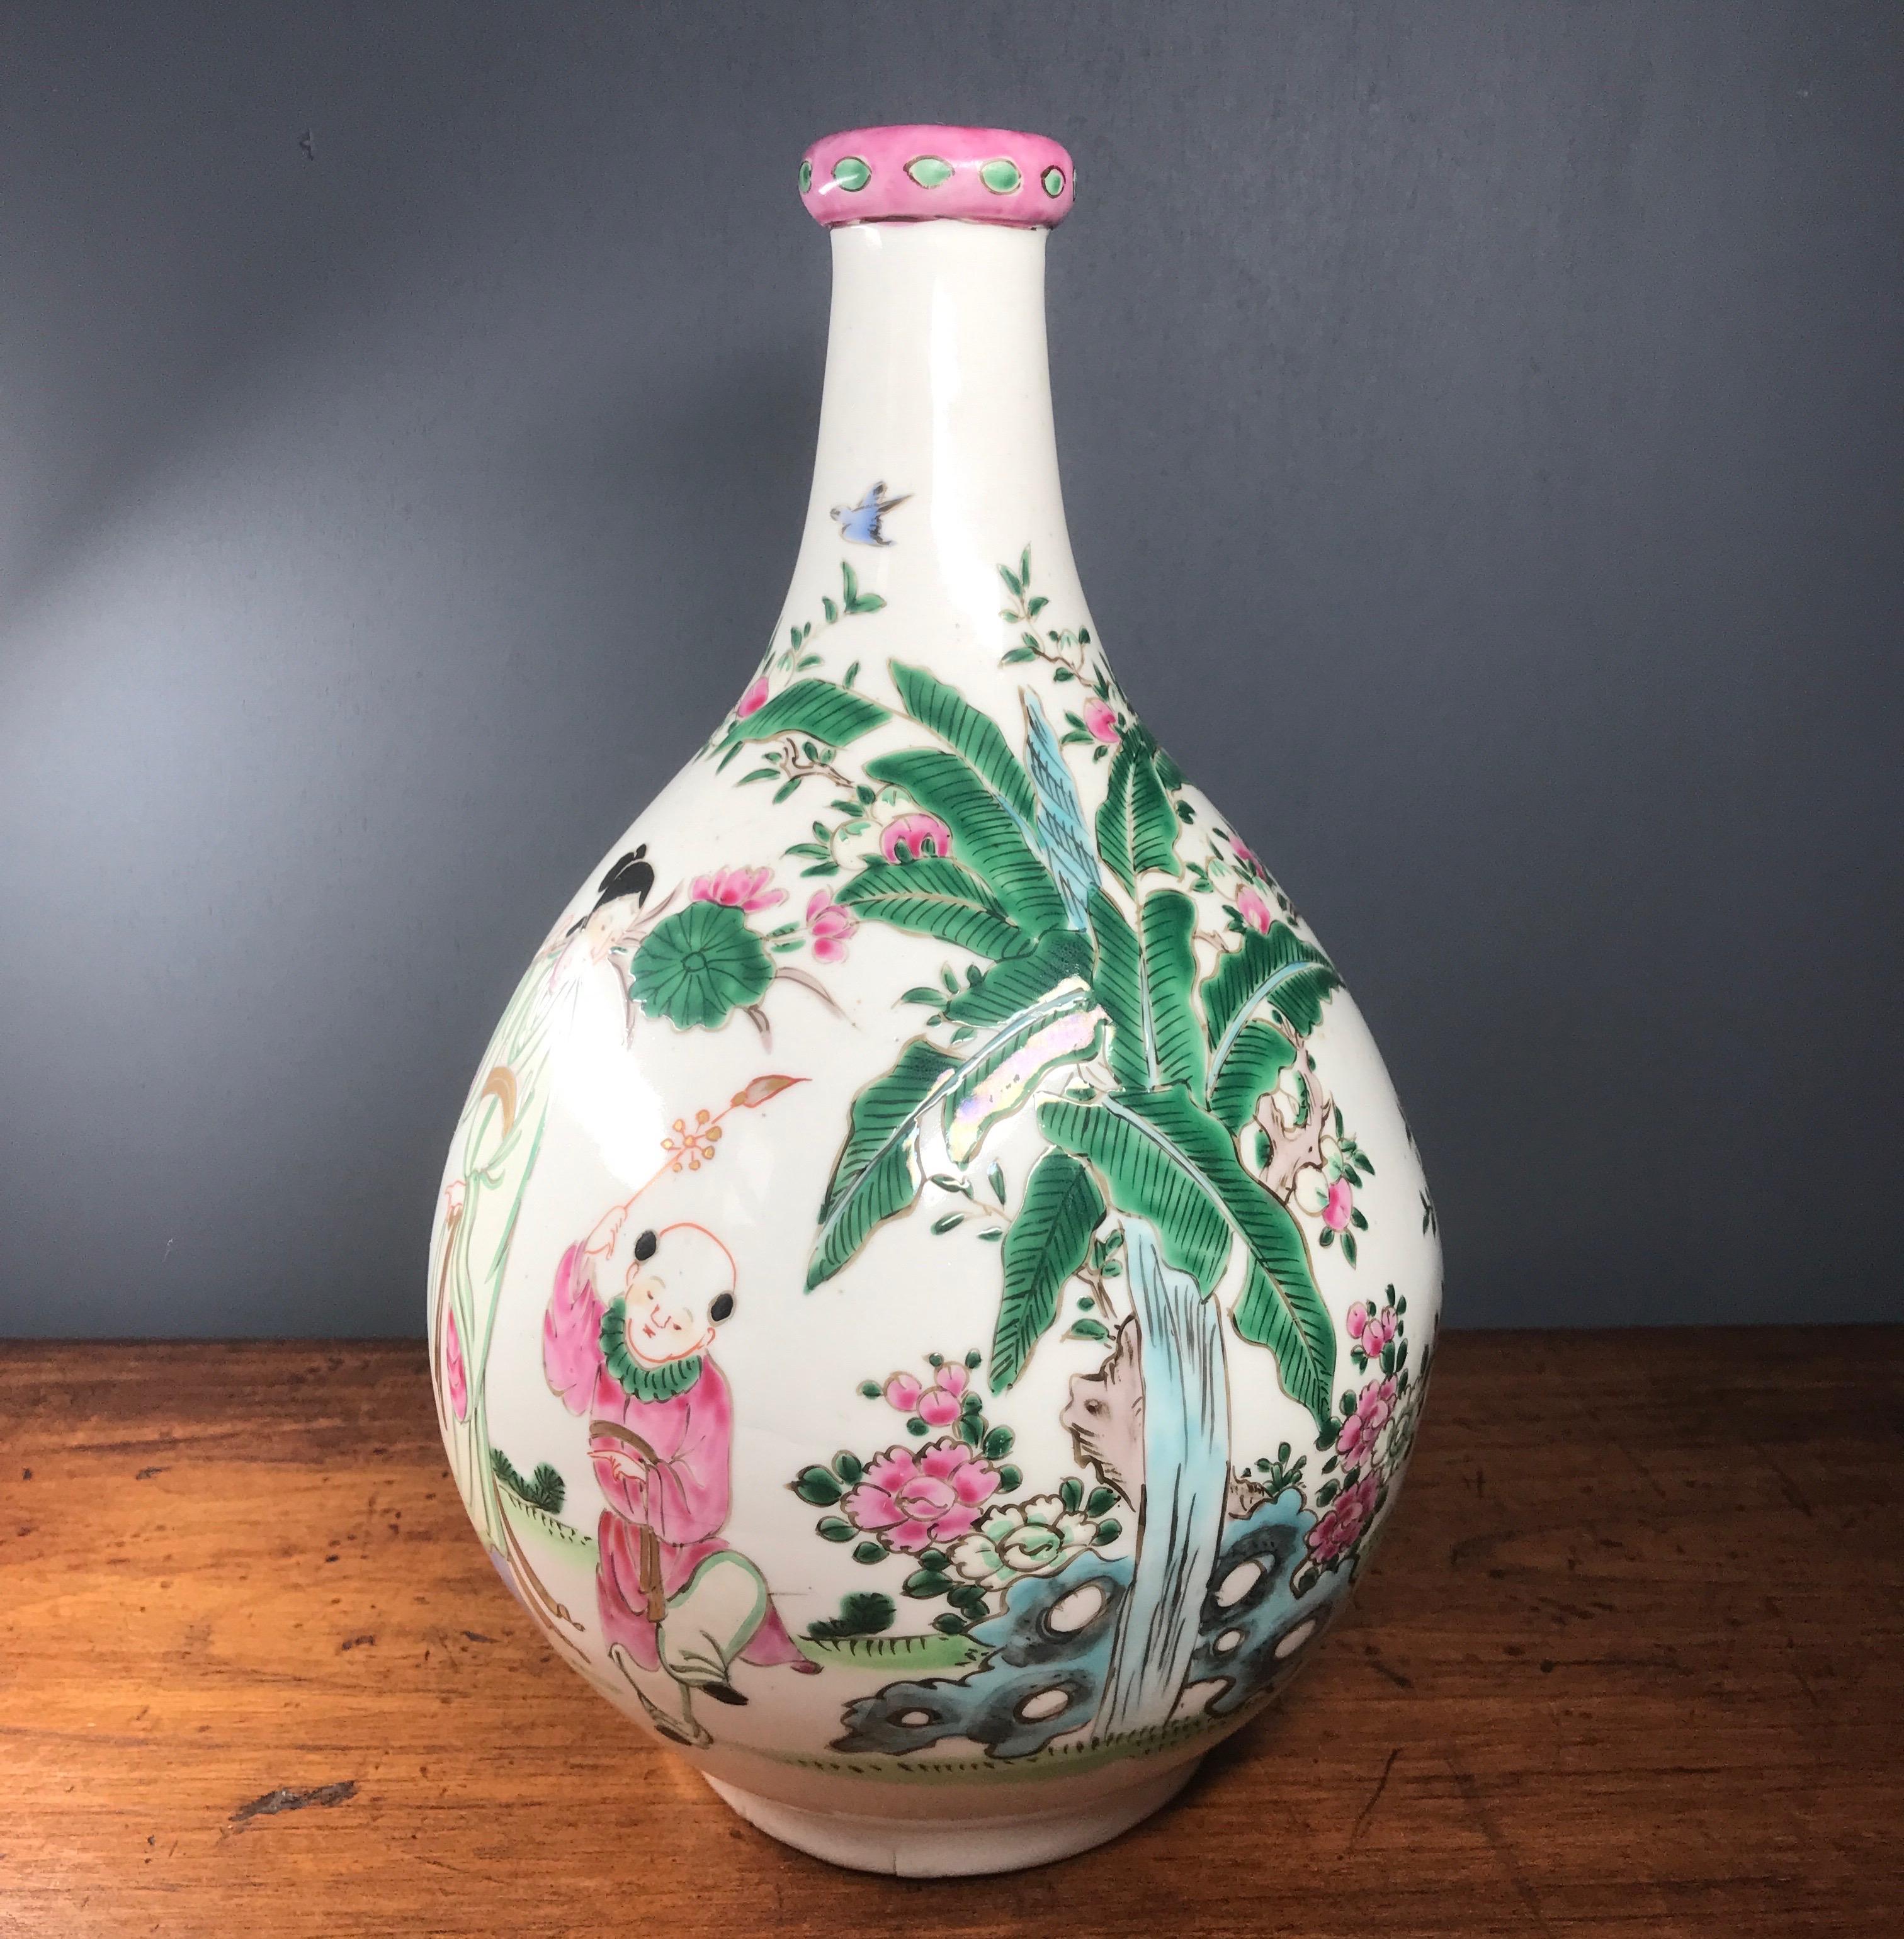 Japanese bottle shape vase, decorated in famille rose colours of pink, green, white, black & turquoise with a lady with children in a garden, including peonies, butterflies, birds, bananas and peaches. 

Unmarked, Meiji period, 19th century.